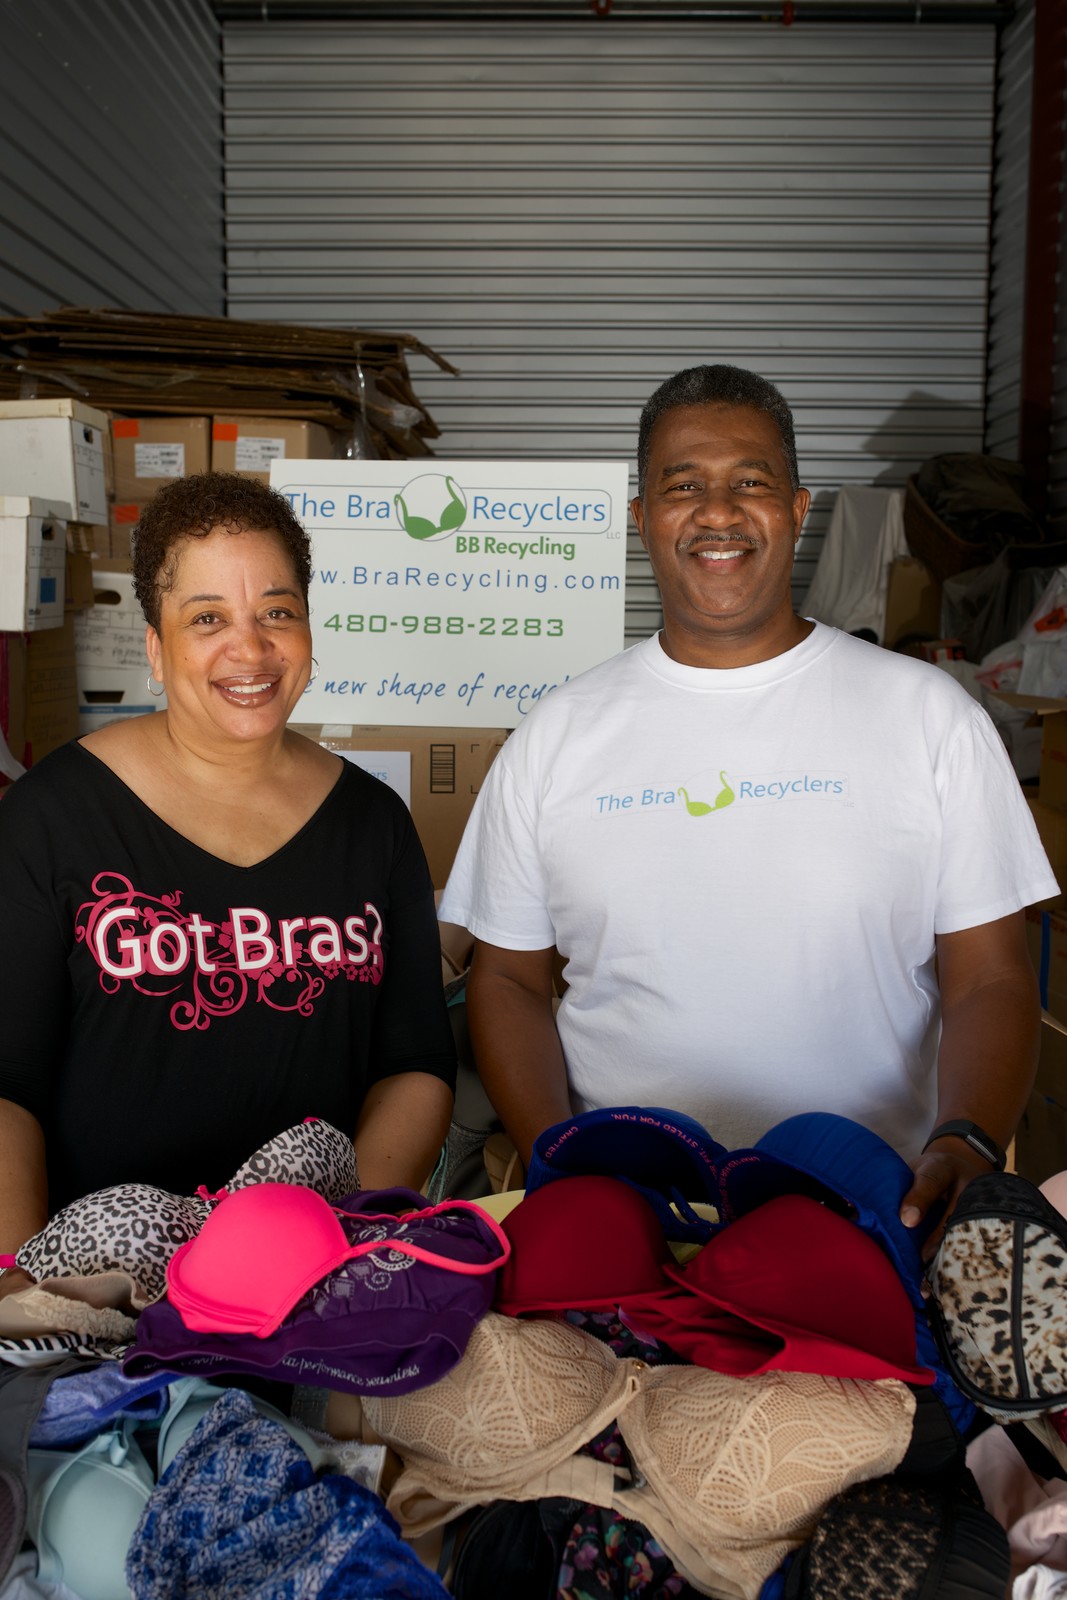 The Bra Recyclers Will Recycle Your Bras to Help Women in Need